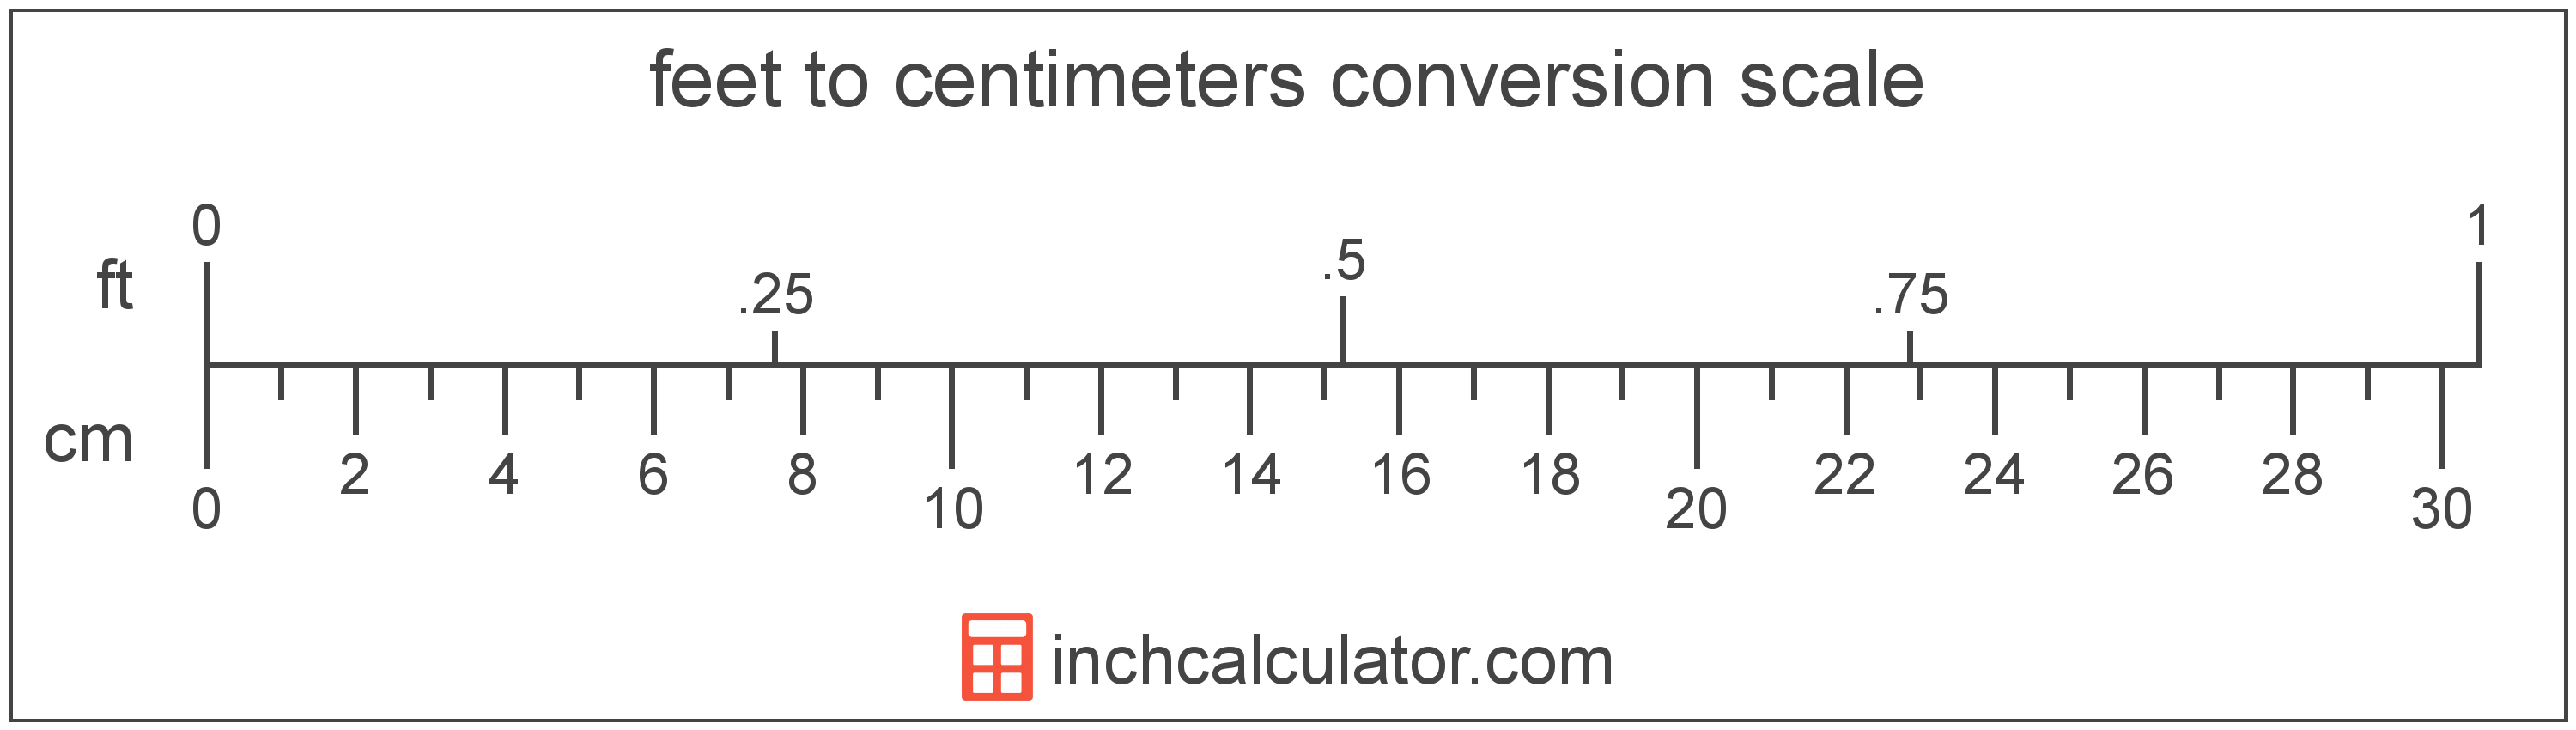 Feet to Centimeters Conversion (ft to cm) - Inch Calculator